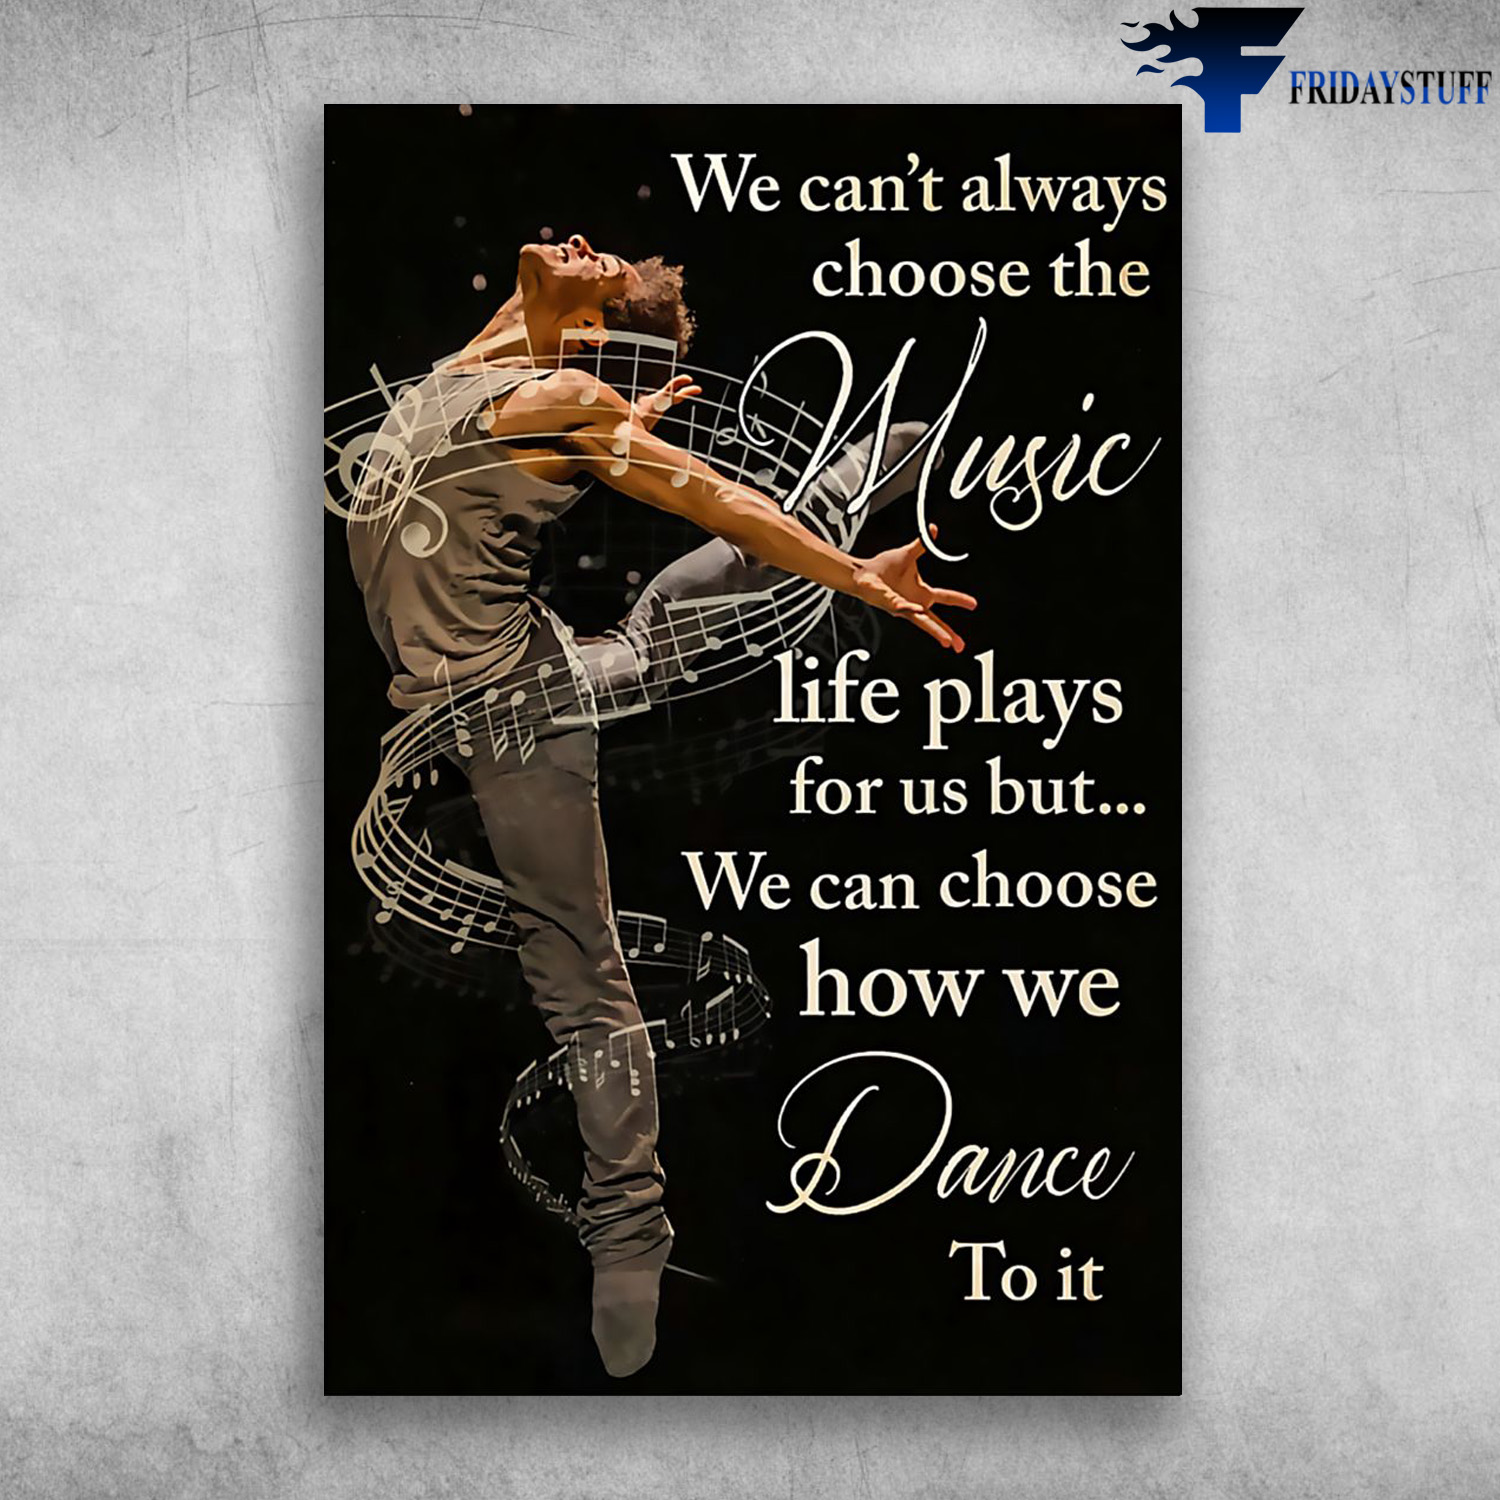 Dancing Man - We Can't Always Choose The Music Life Play For Us But, We Can Choose How We Dance To It